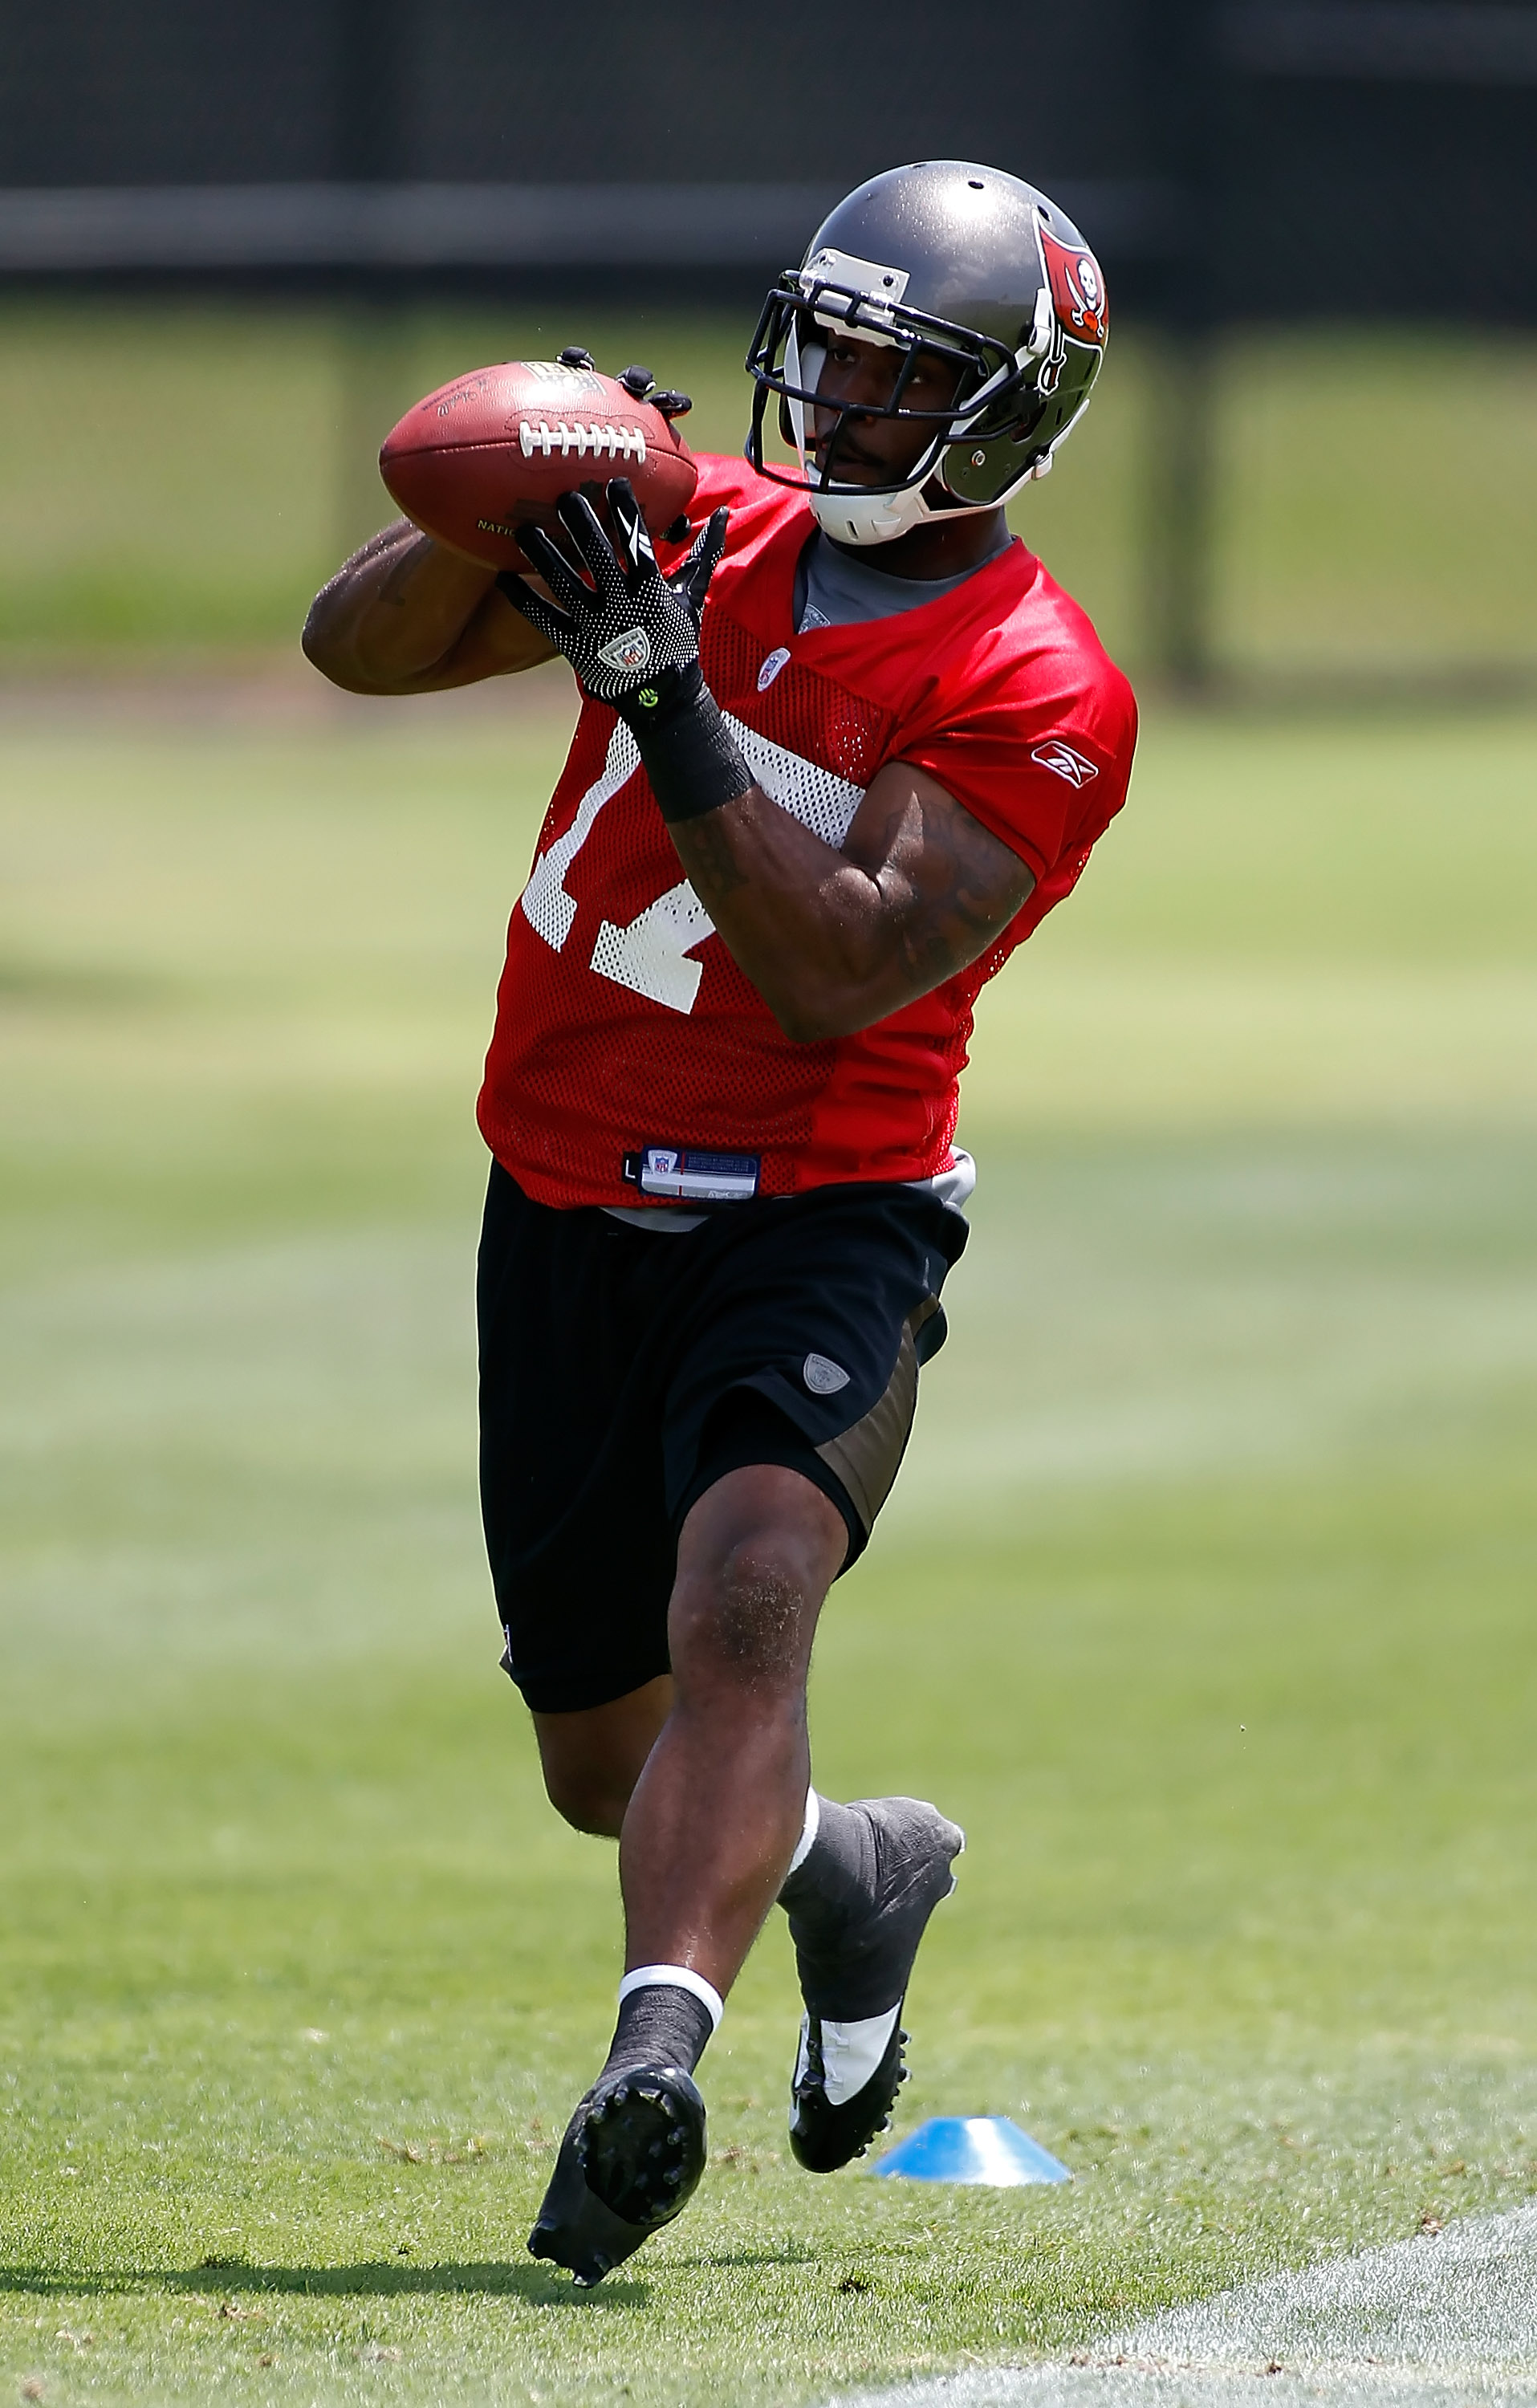 TAMPA, FL - MAY 01:  Receiver Arrelious Benn #17 of the Tampa Bay Buccaneers catches a pass during the Buccaneers Rookie mini camp at One Buccaneer Place on May 1, 2010 in Tampa, Florida.  (Photo by J. Meric/Getty Images)